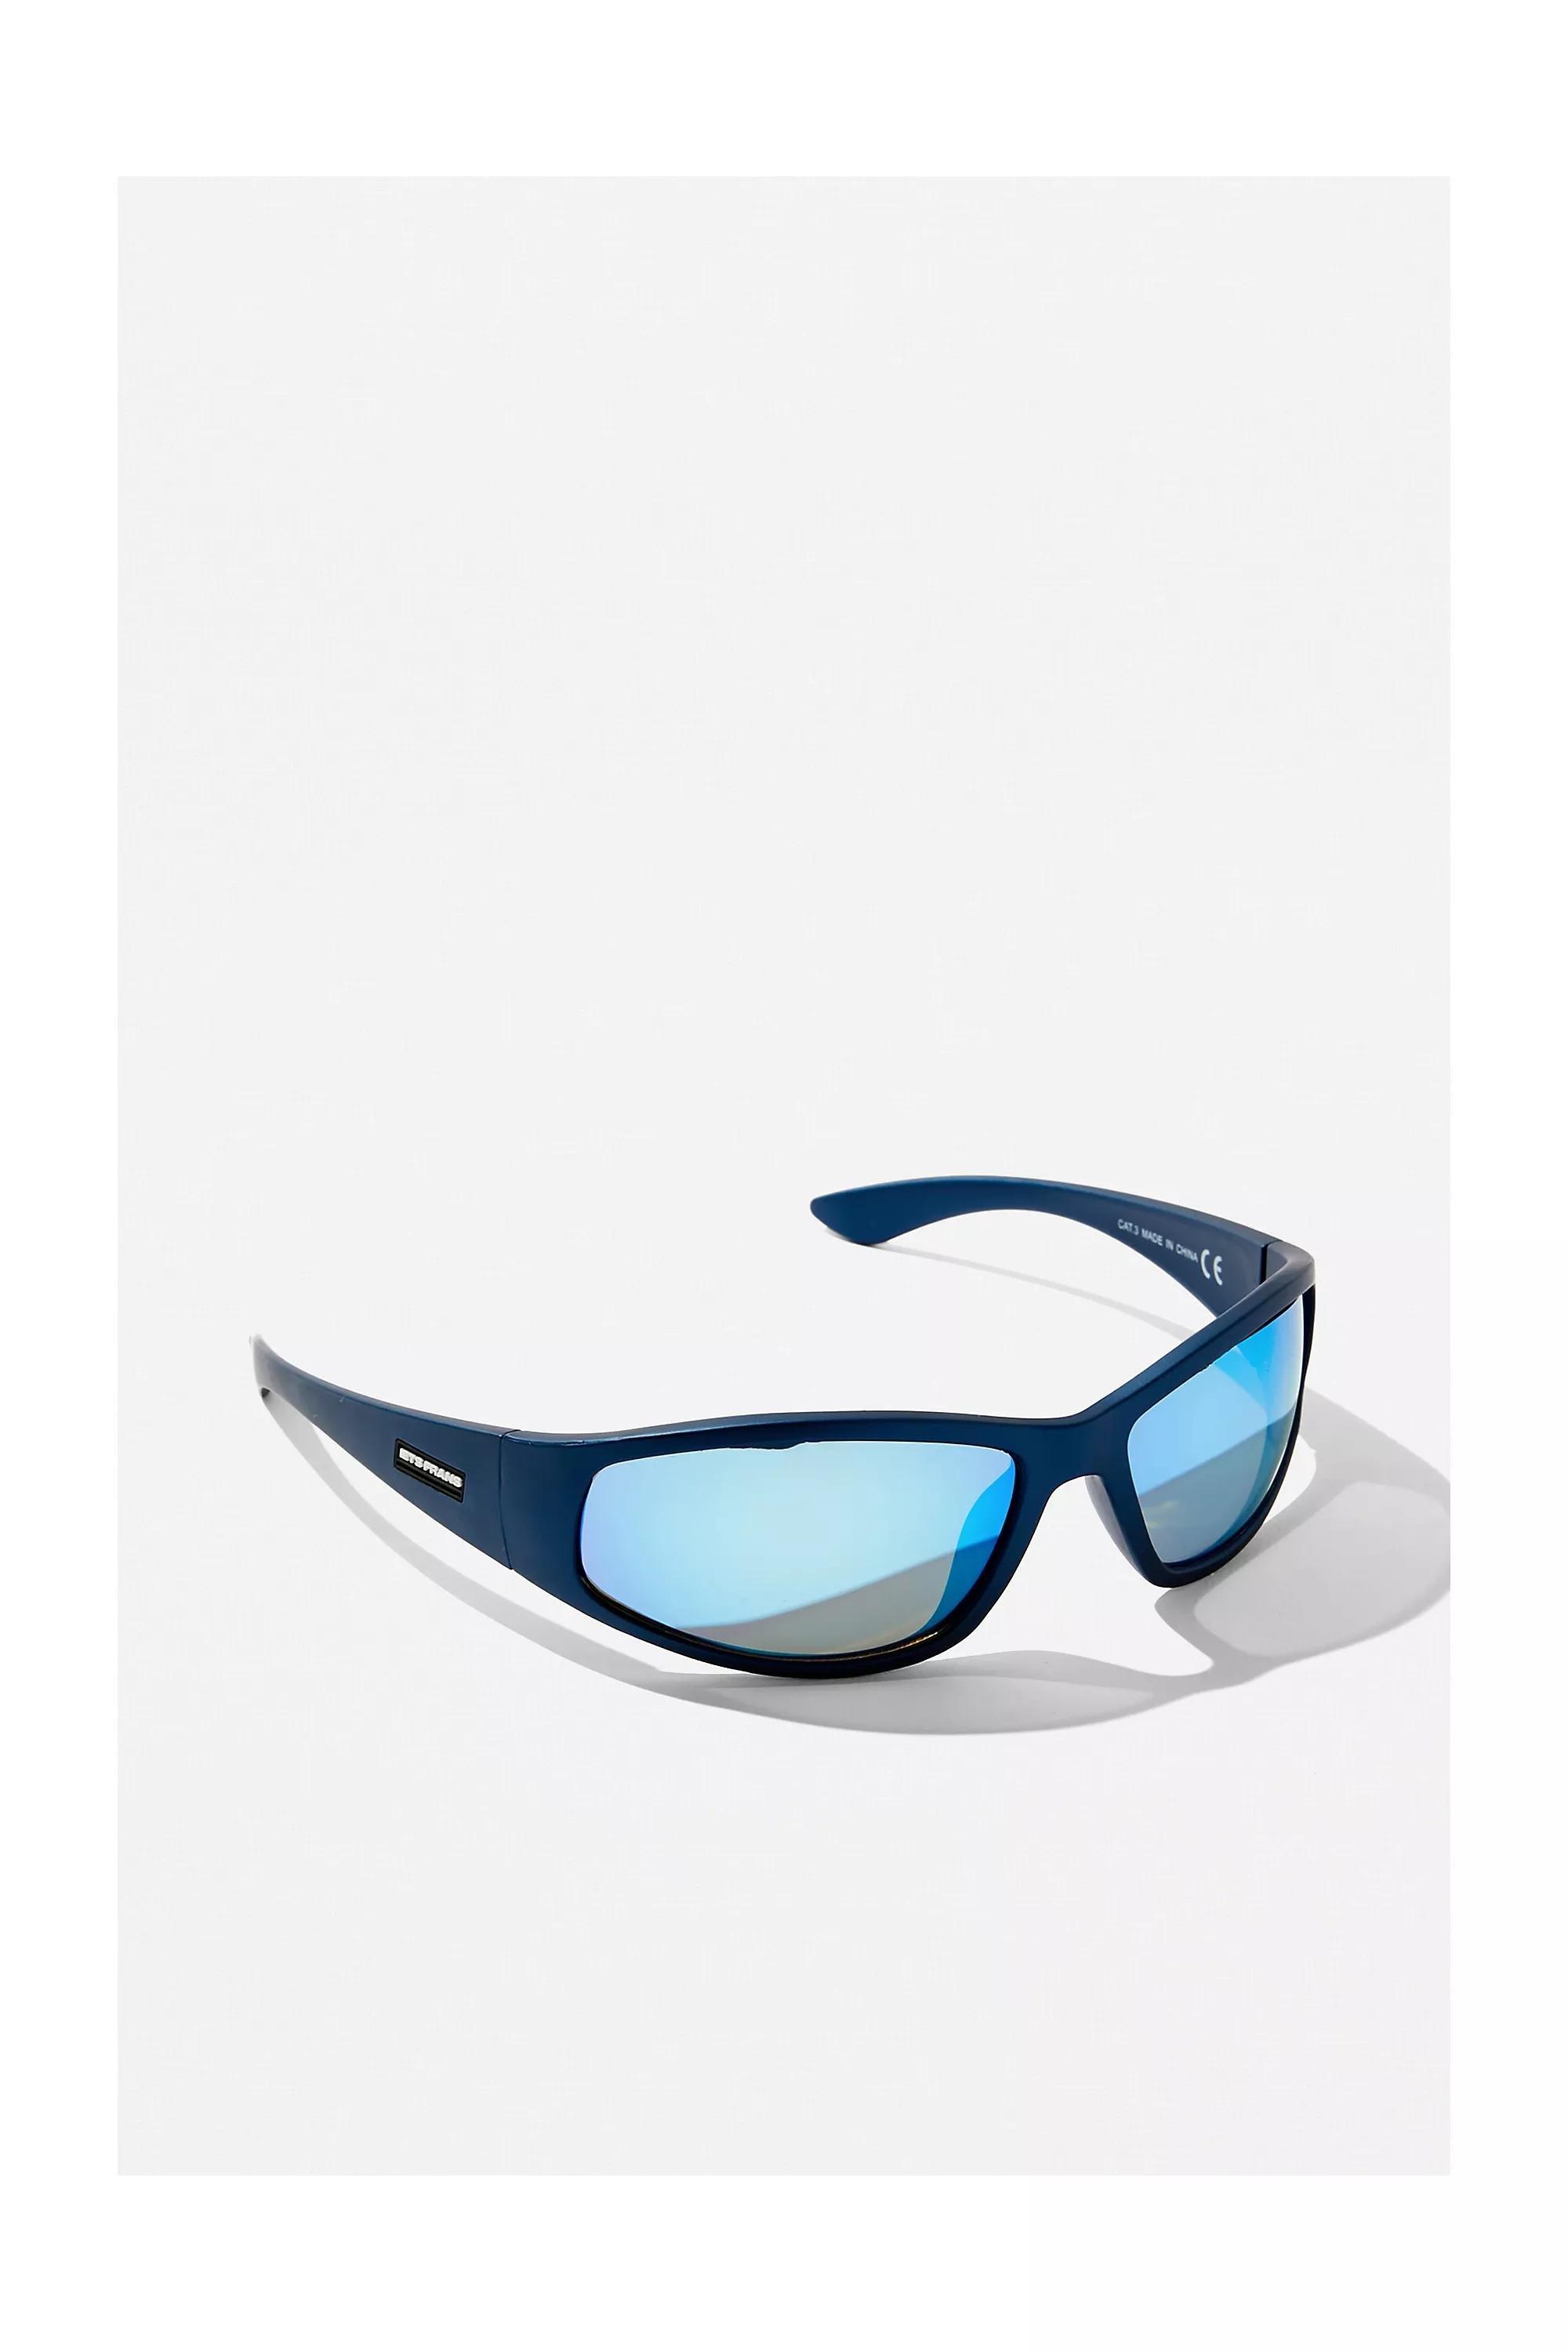 Urban Outfitters - Blue Sports Wrap Sunglasses